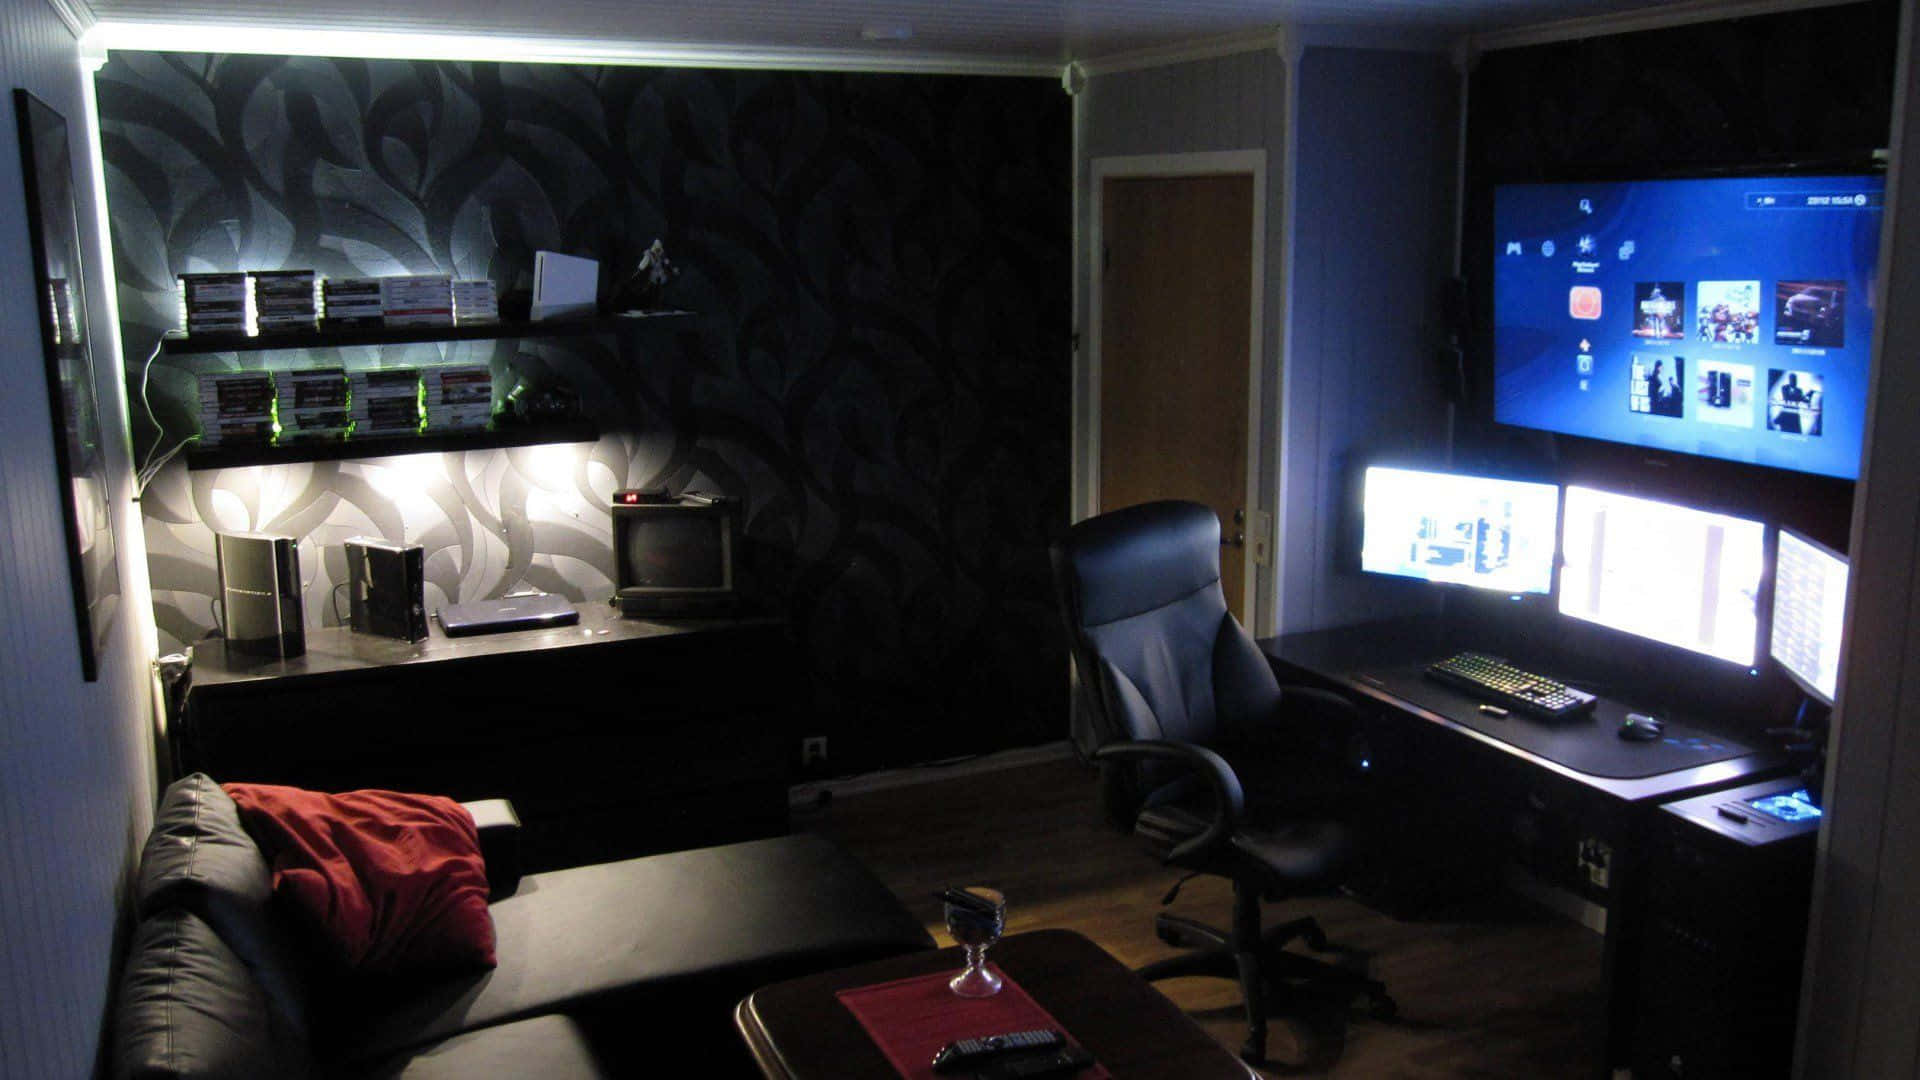 Take your gaming experience to the next level in this stylish game room.